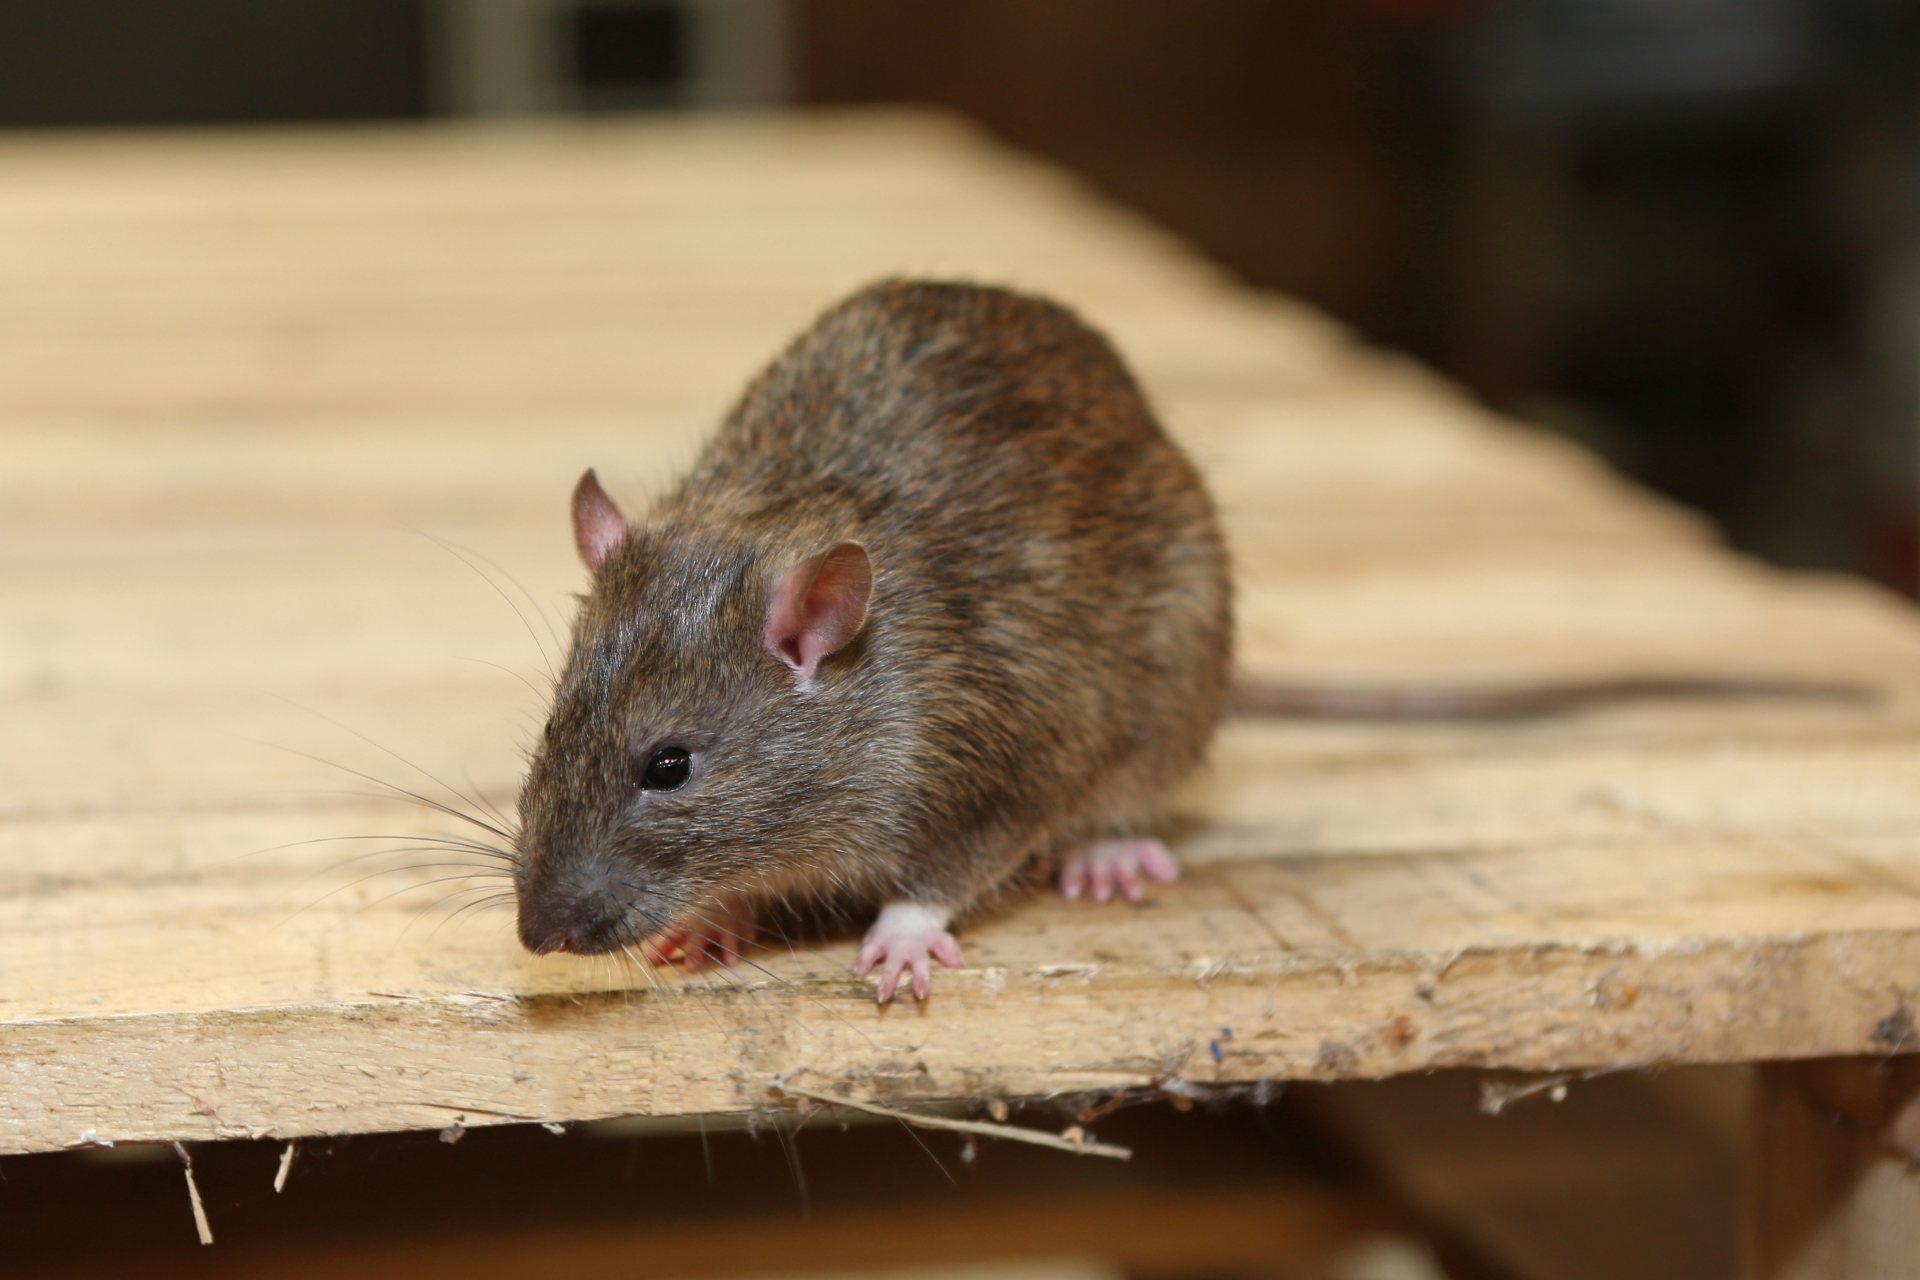 Rat Infestation, Pest Control in Dalston, E8. Call Now 020 8166 9746